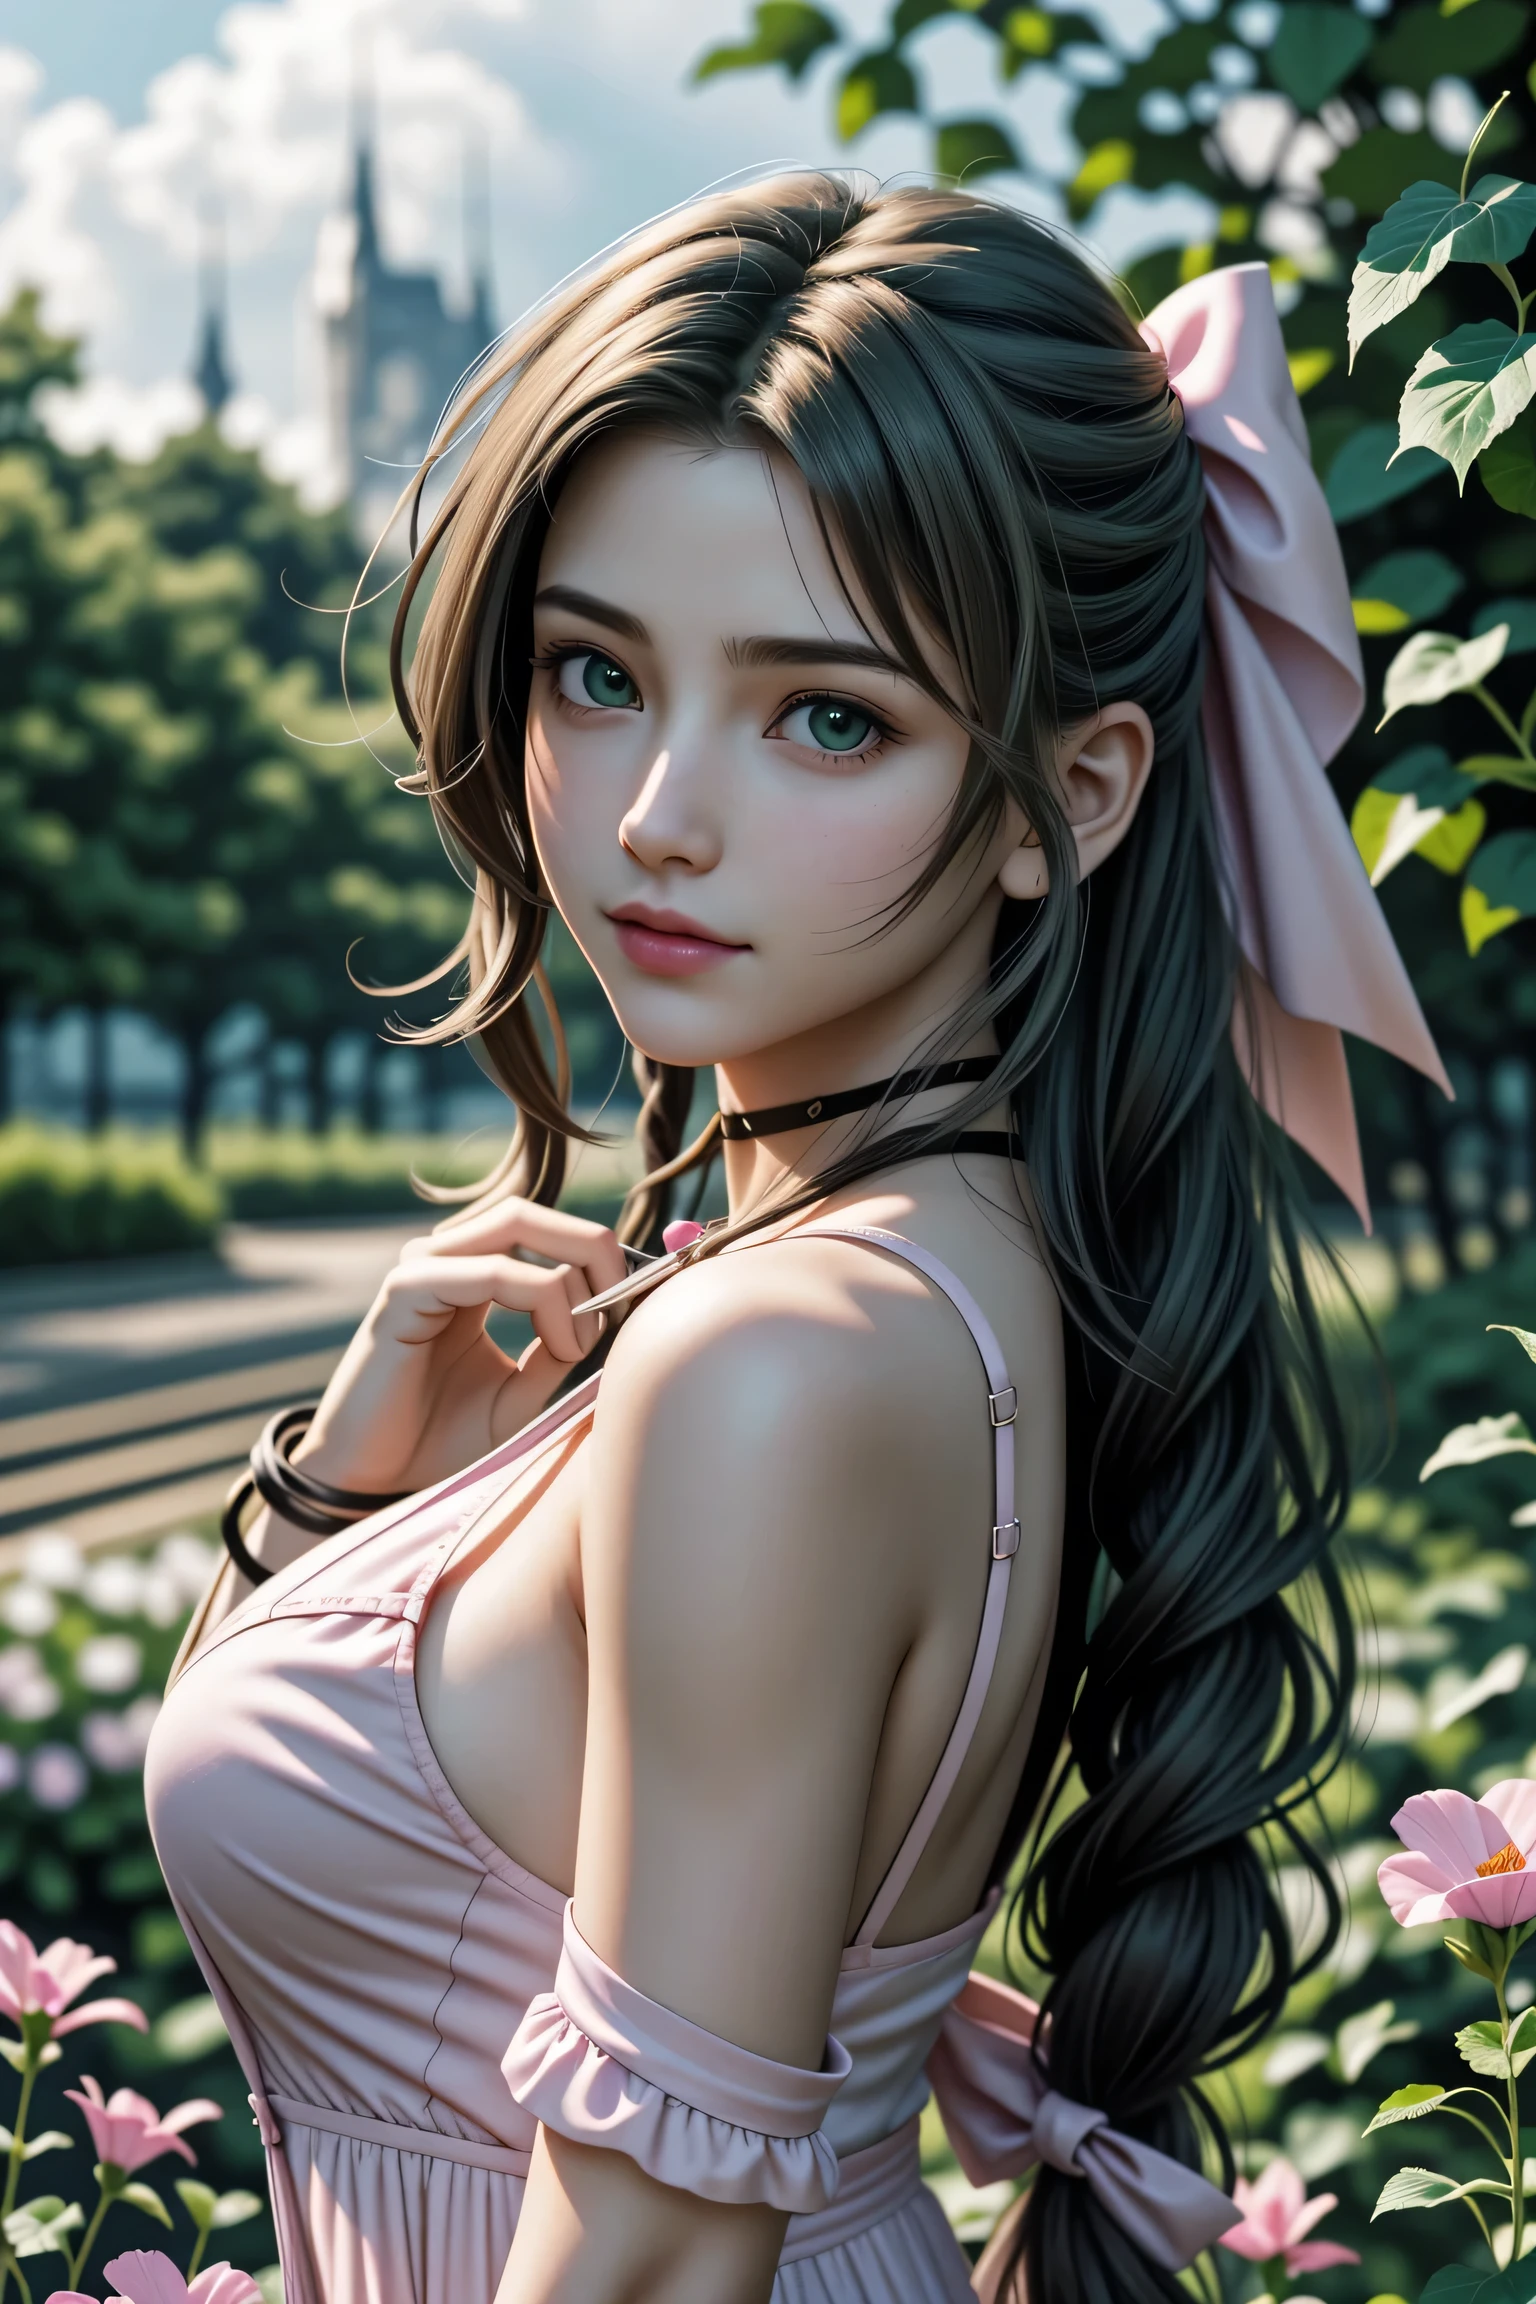 (masterpiece, 最high quality)
Aeris FF7, 1 Girl, alone, Long Hair, bangs, Brown Hair, dress, bow, ribbon, jewelry, Closed Mouth, Green Eyes, Red jacket, hair pink ribbon, Upper Body, Braid, hair bow, Side Lock, choker, necklace, lips, parted bangs, pink bow, Portraiture, Pink dress,  Photorealistic,Ultra HD,high quality,masterpiece,Digital SLR,Detailed details,Intricate details,Anatomical basis,Depicted in detail,A detailed face,Realistic skin texture,Vivid details,Perfect Anatomy,Perfect Anatomy,Anatomically correct hand,Anatomically correct fingers,Super Detail,Complex 3D rendering,Huge ,Sexy pose,Beautiful morning glory(flower),Rainy Sky,Beautiful scenery,Fantastic rainy sky,Picturesque,Pink Lips,smile,Fantastic butterflies々,
